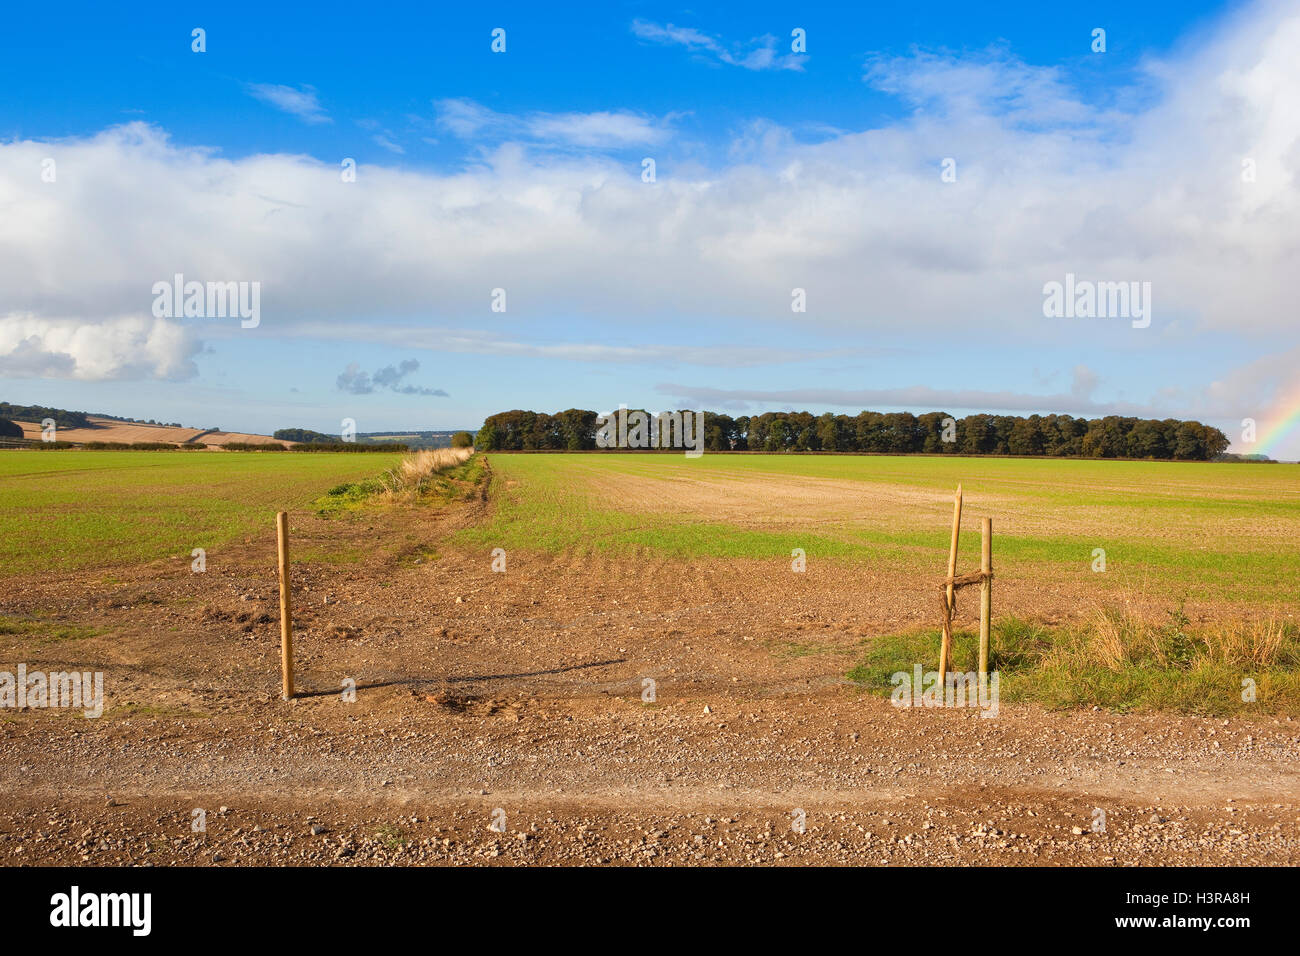 A small plantation viewed over fields of seedling cereal crops and a wire fence with wooden posts in Autumn. Stock Photo